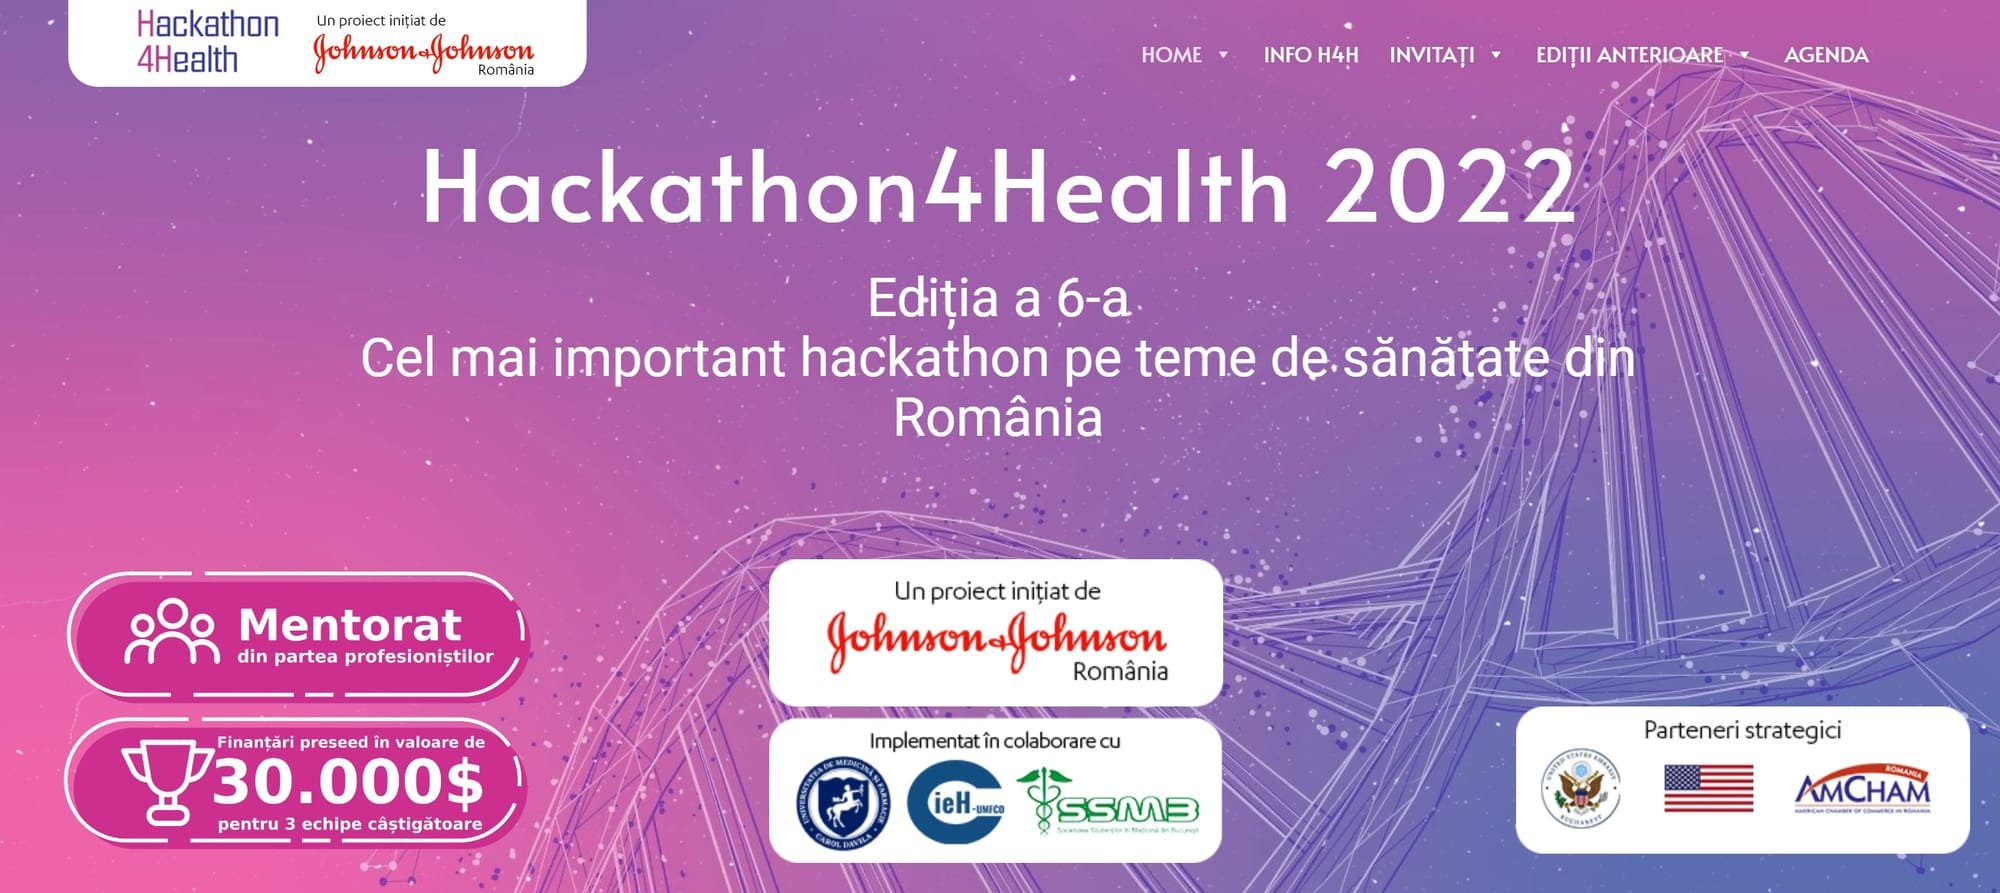 Octavian was a Mentor at the Hackathon4Health in Bucharest; the 2 mentored teams won 2 of the 3 prizes